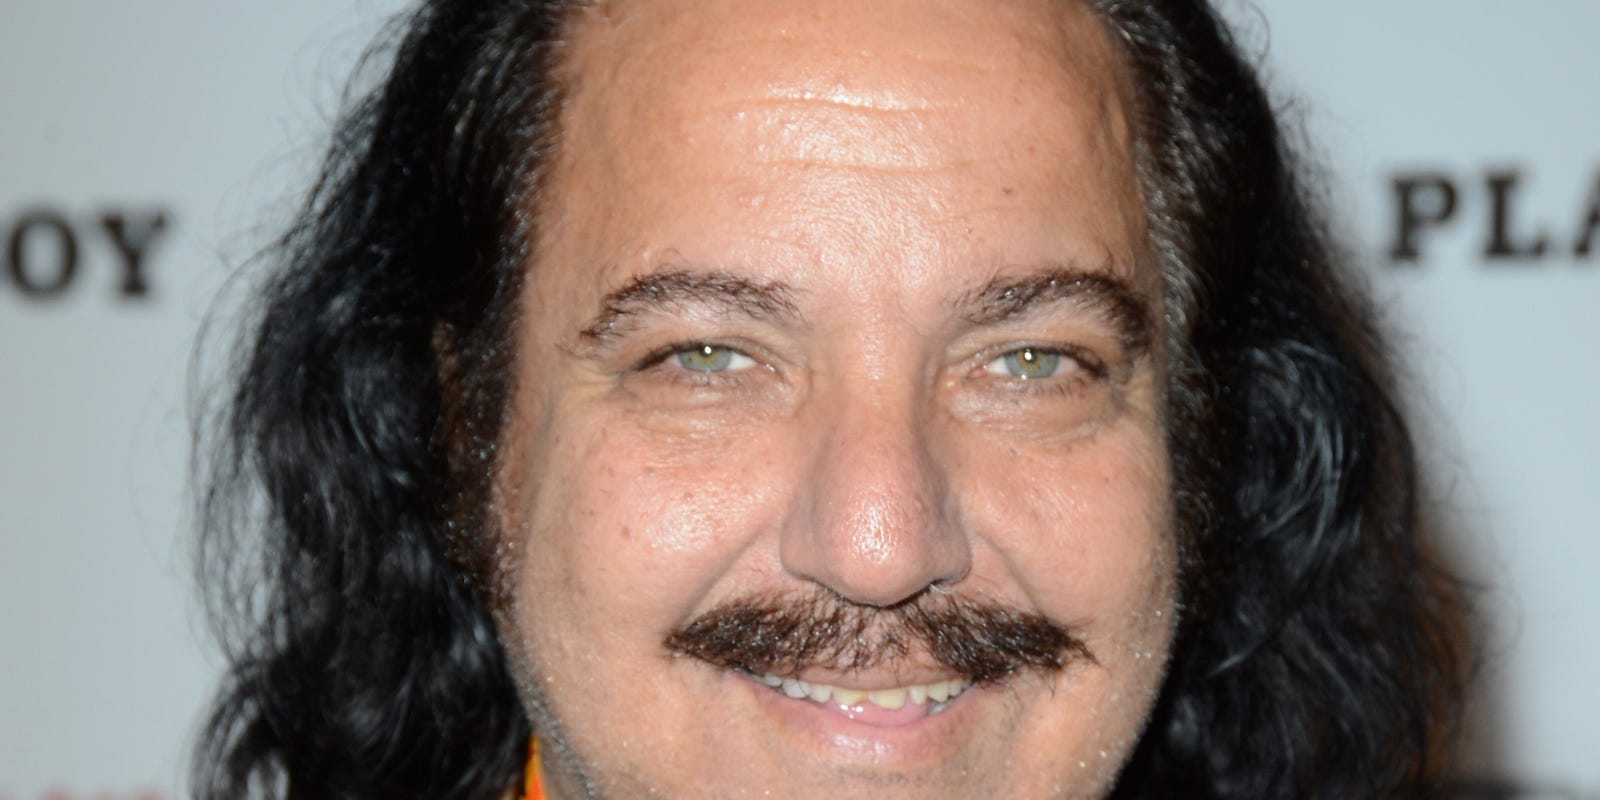 Porn star Ron Jeremy in L.A. hospital for aneurysm.